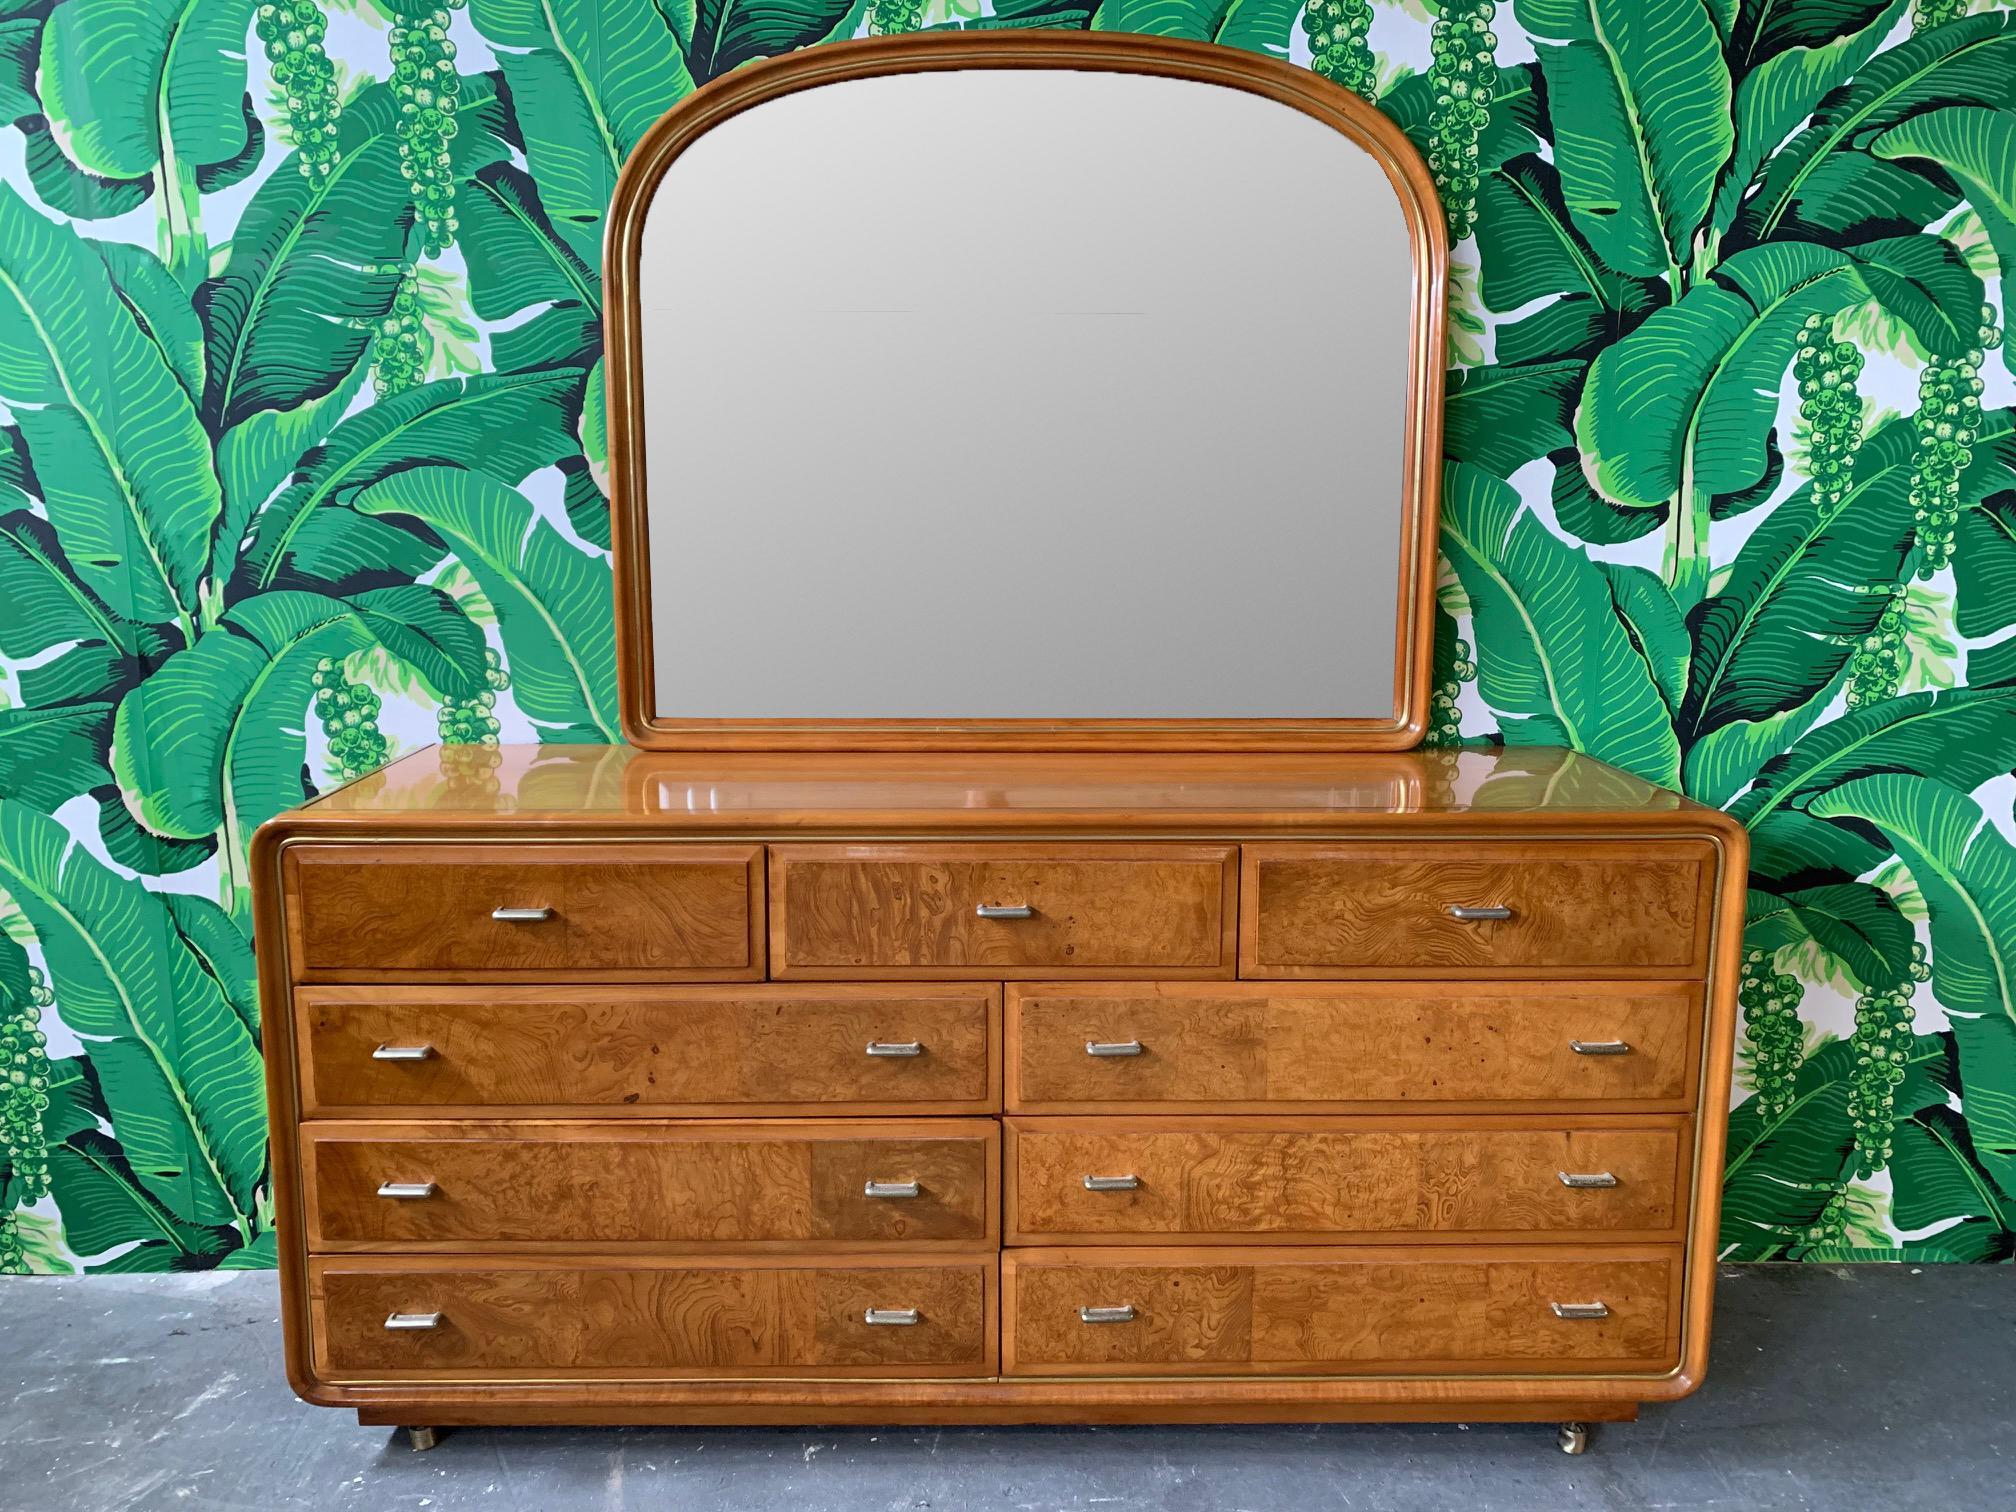 Art Deco style dresser by American of Martinsville features burl wood drawer faces, brass hardware and matching mirror with routed detailing. In beautiful vintage condition with only very minor signs of use consistent with age. Dresser measures: 68